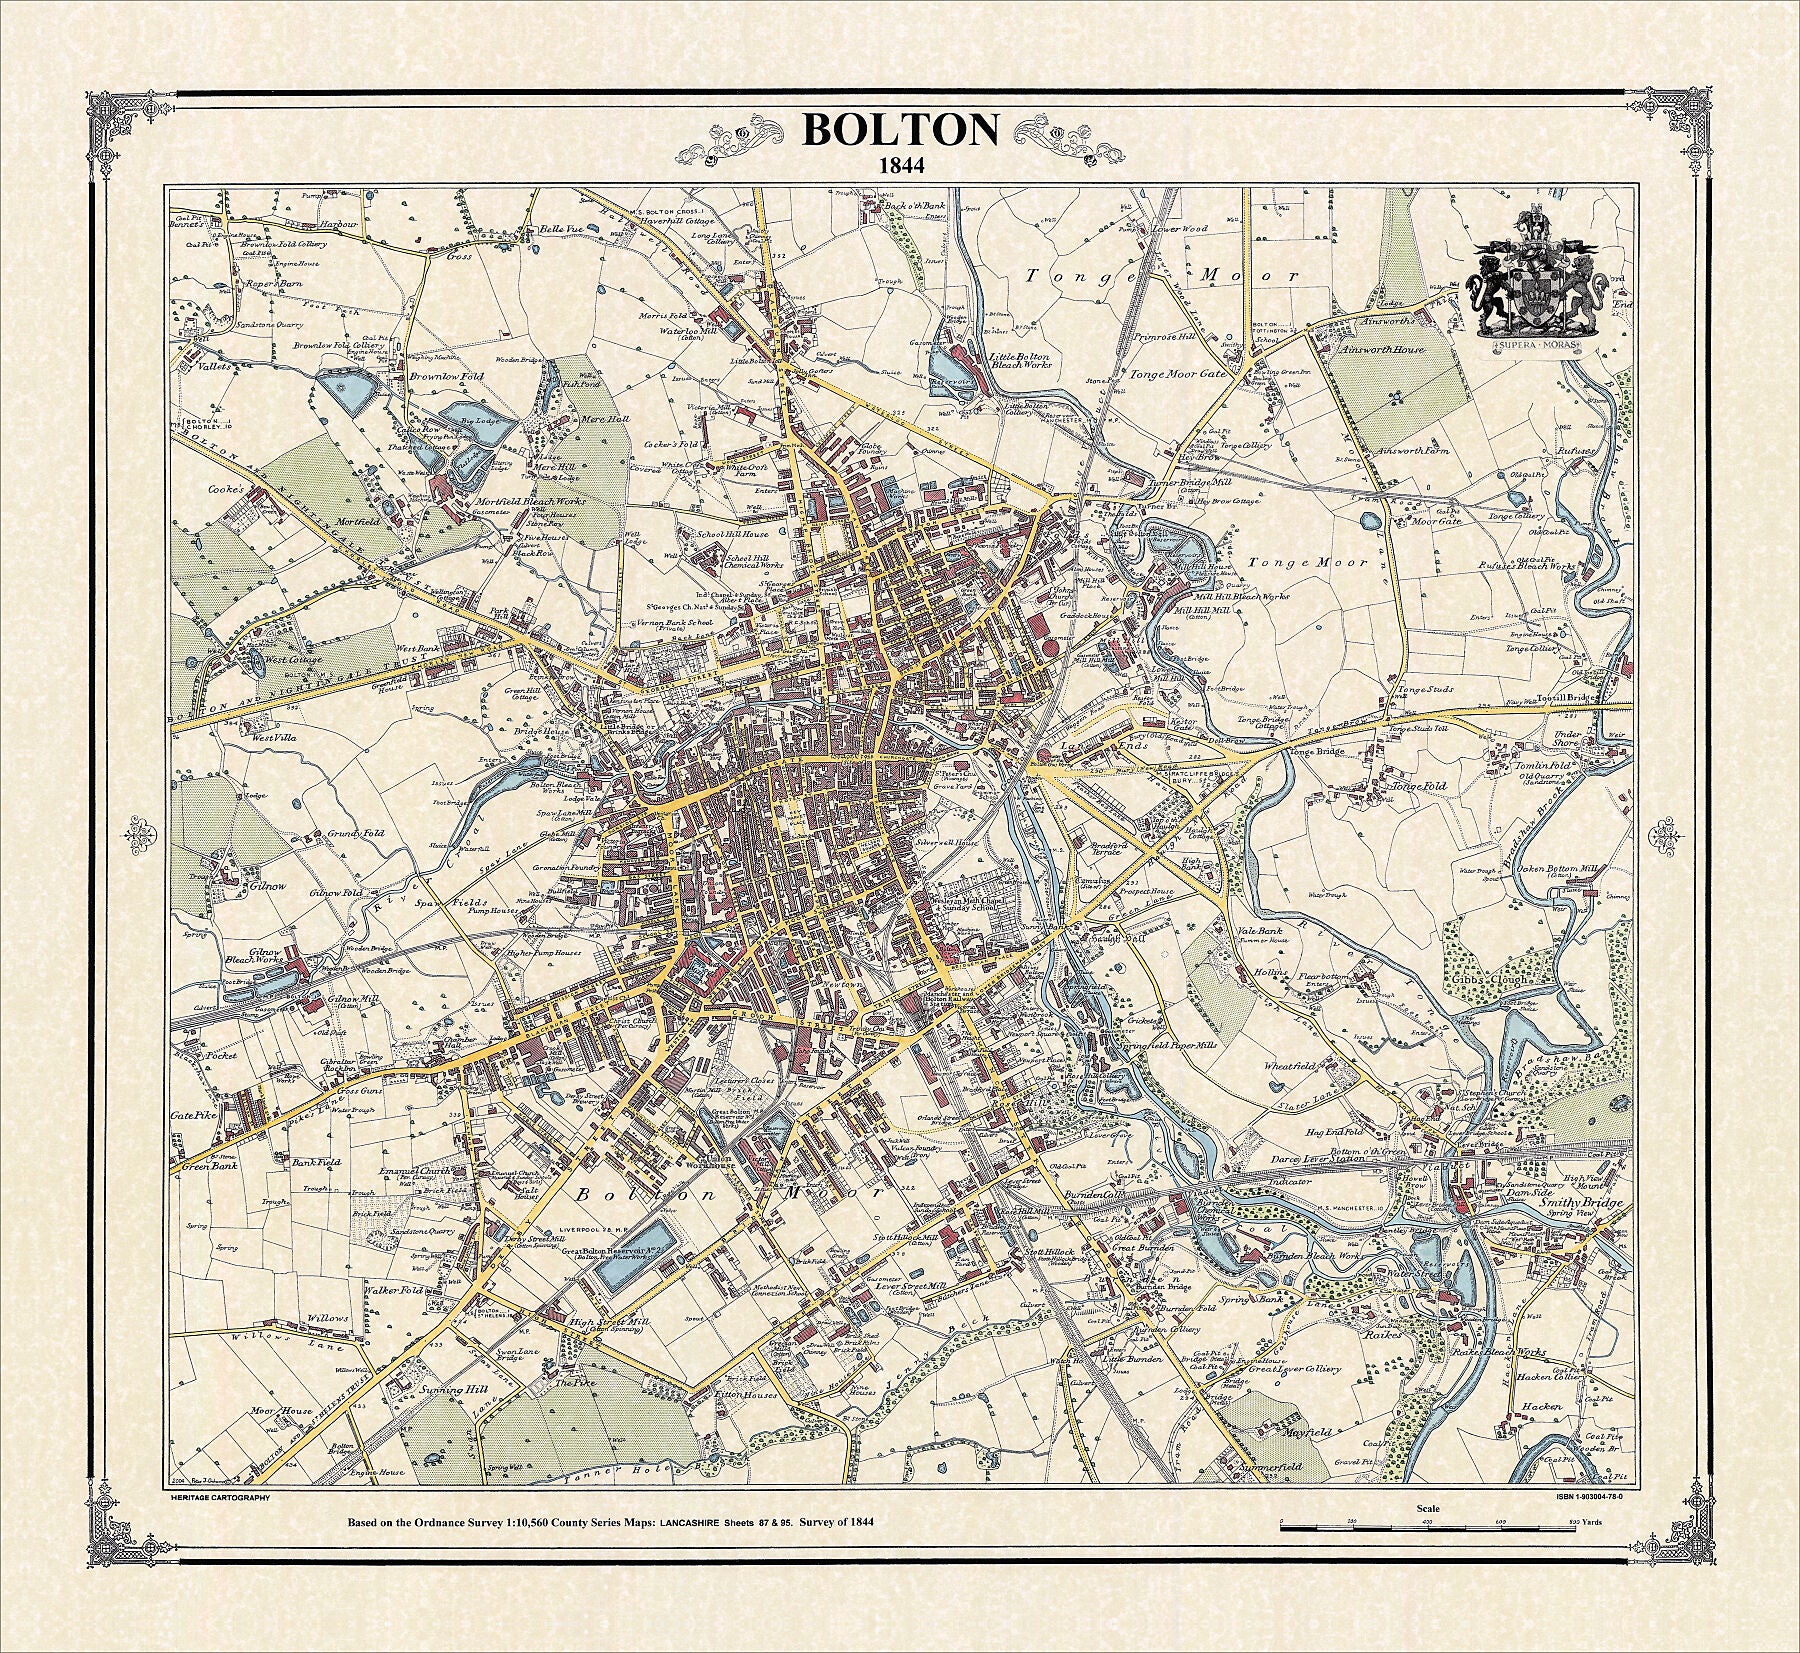 Coloured Victorian map of Bolton in 1844 by Peter J Adams of Heritage Cartography